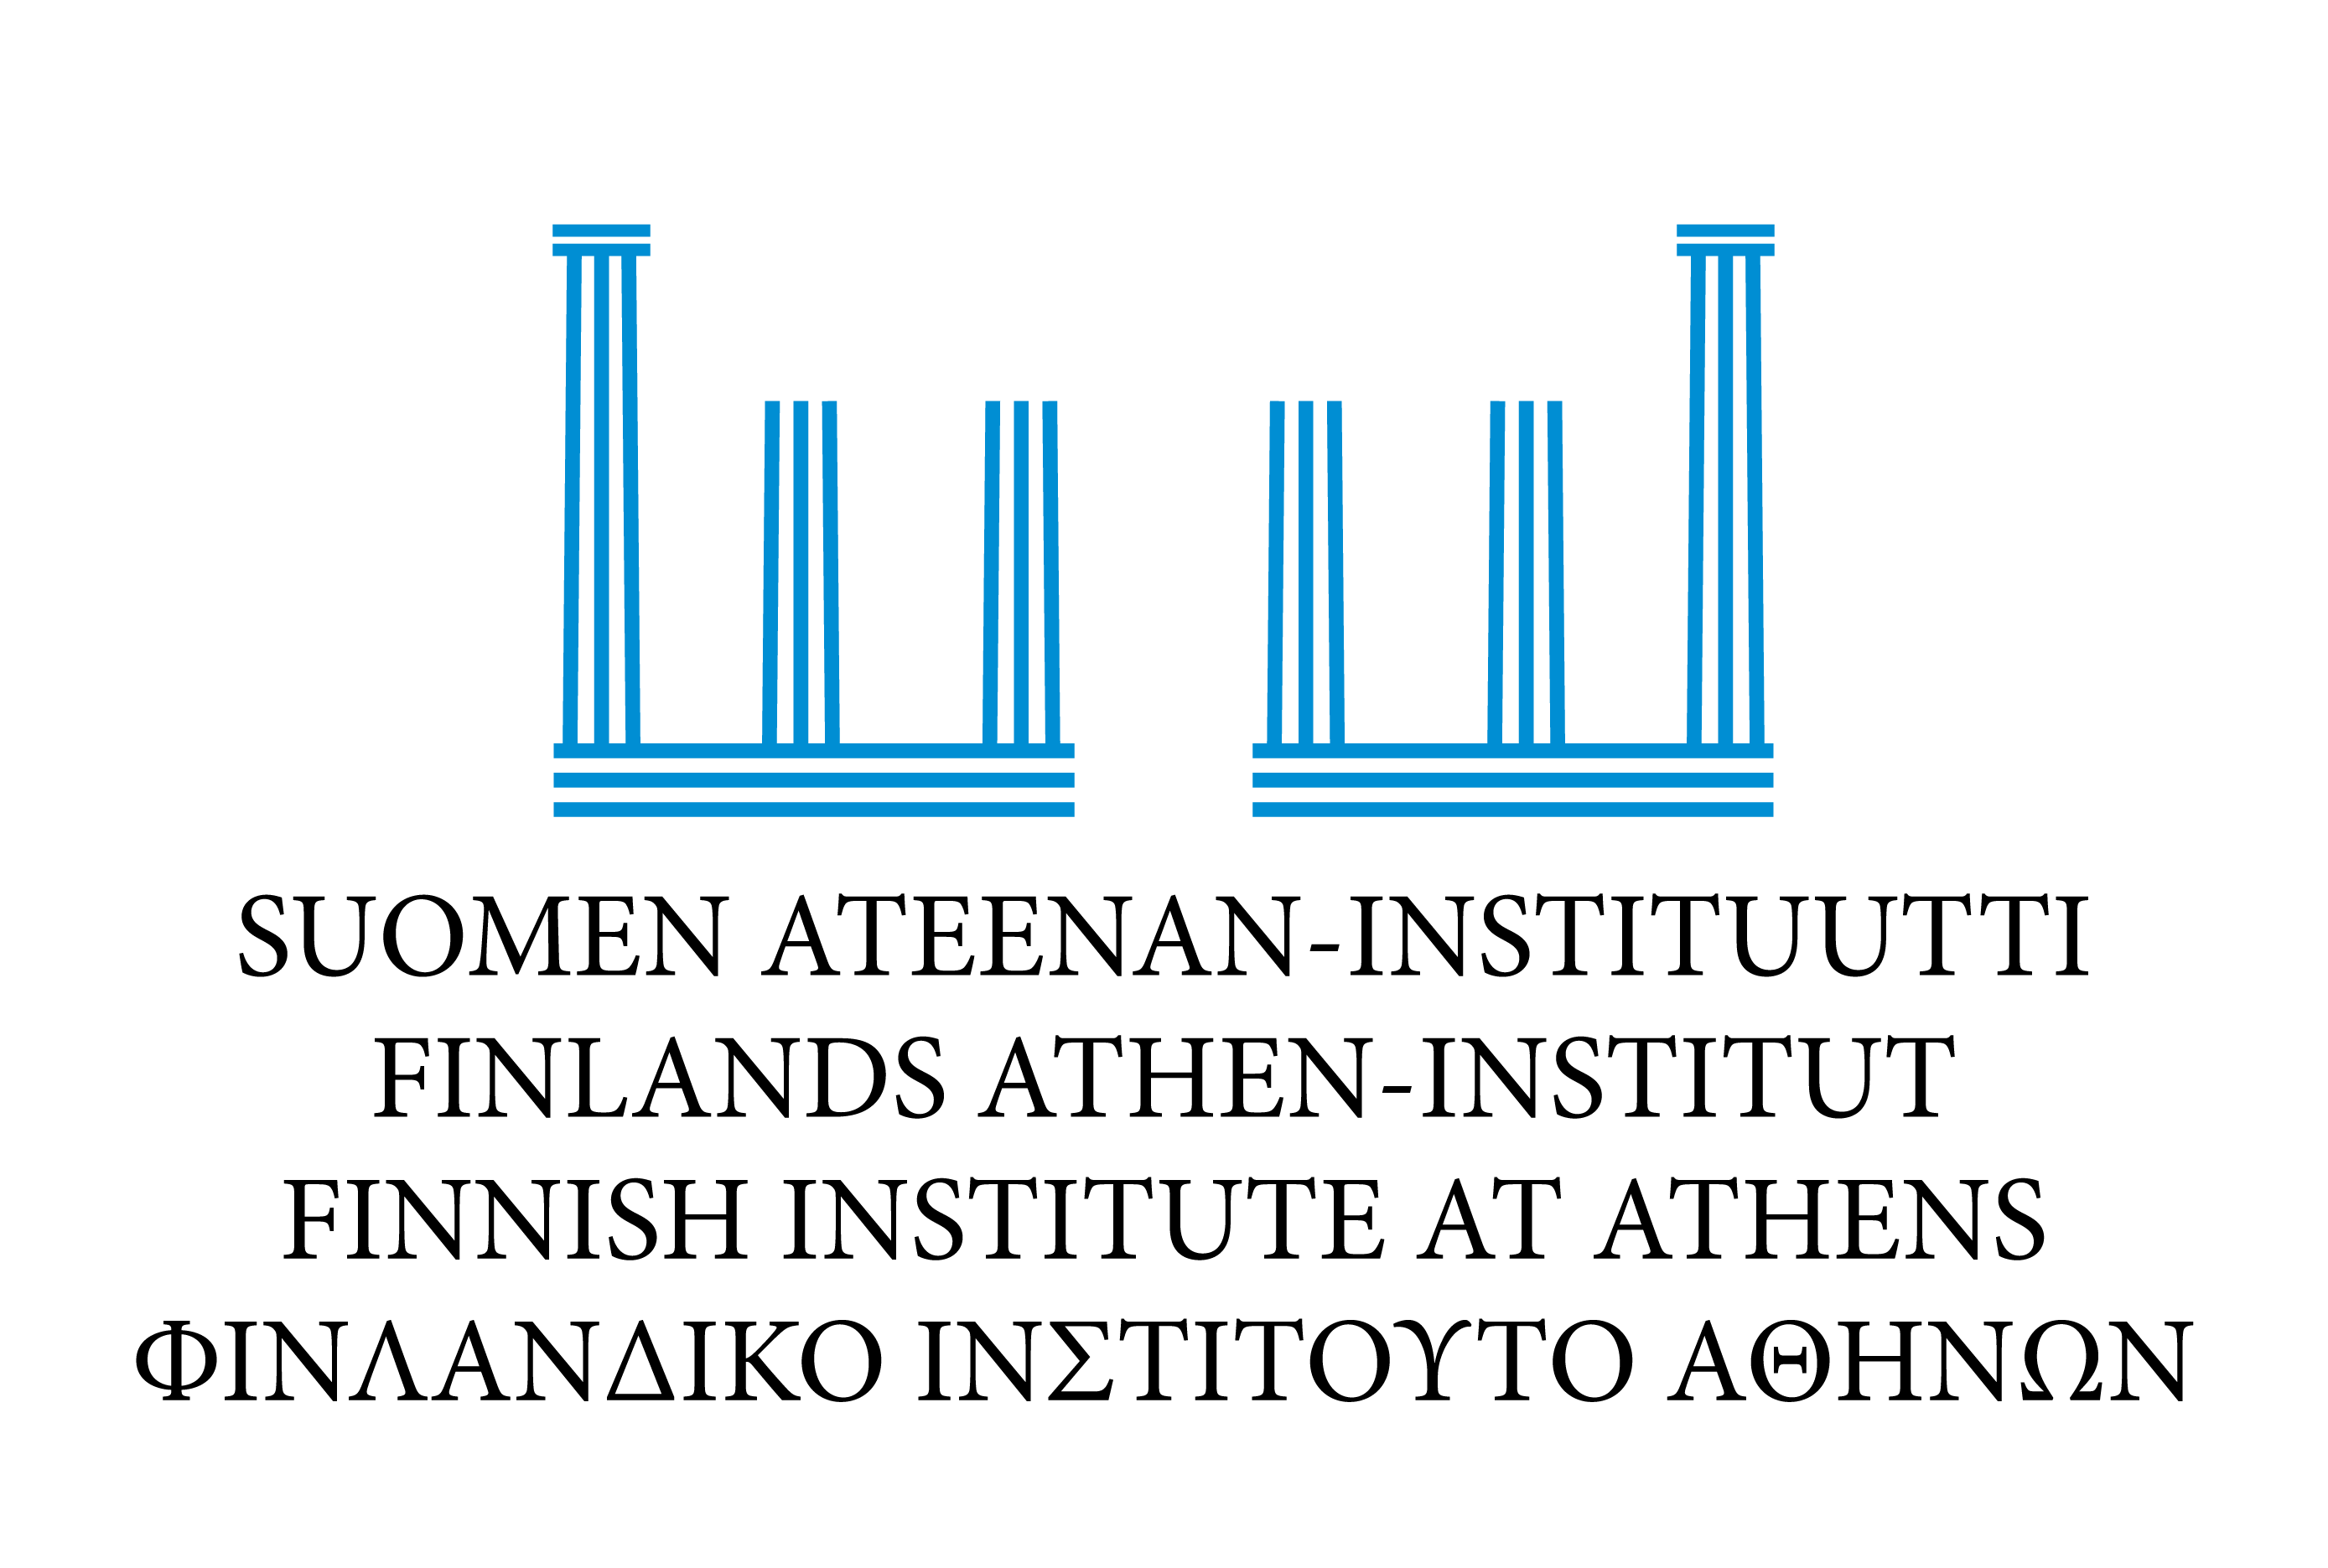 Institute's logo consisting of six blue pillars against white background. Pillars are made of vertical and horizontal lines and lay upon a base formed by horizontal blues. Below the pillars reads the institute's name in Finnish, Swedish, English and Greek.  